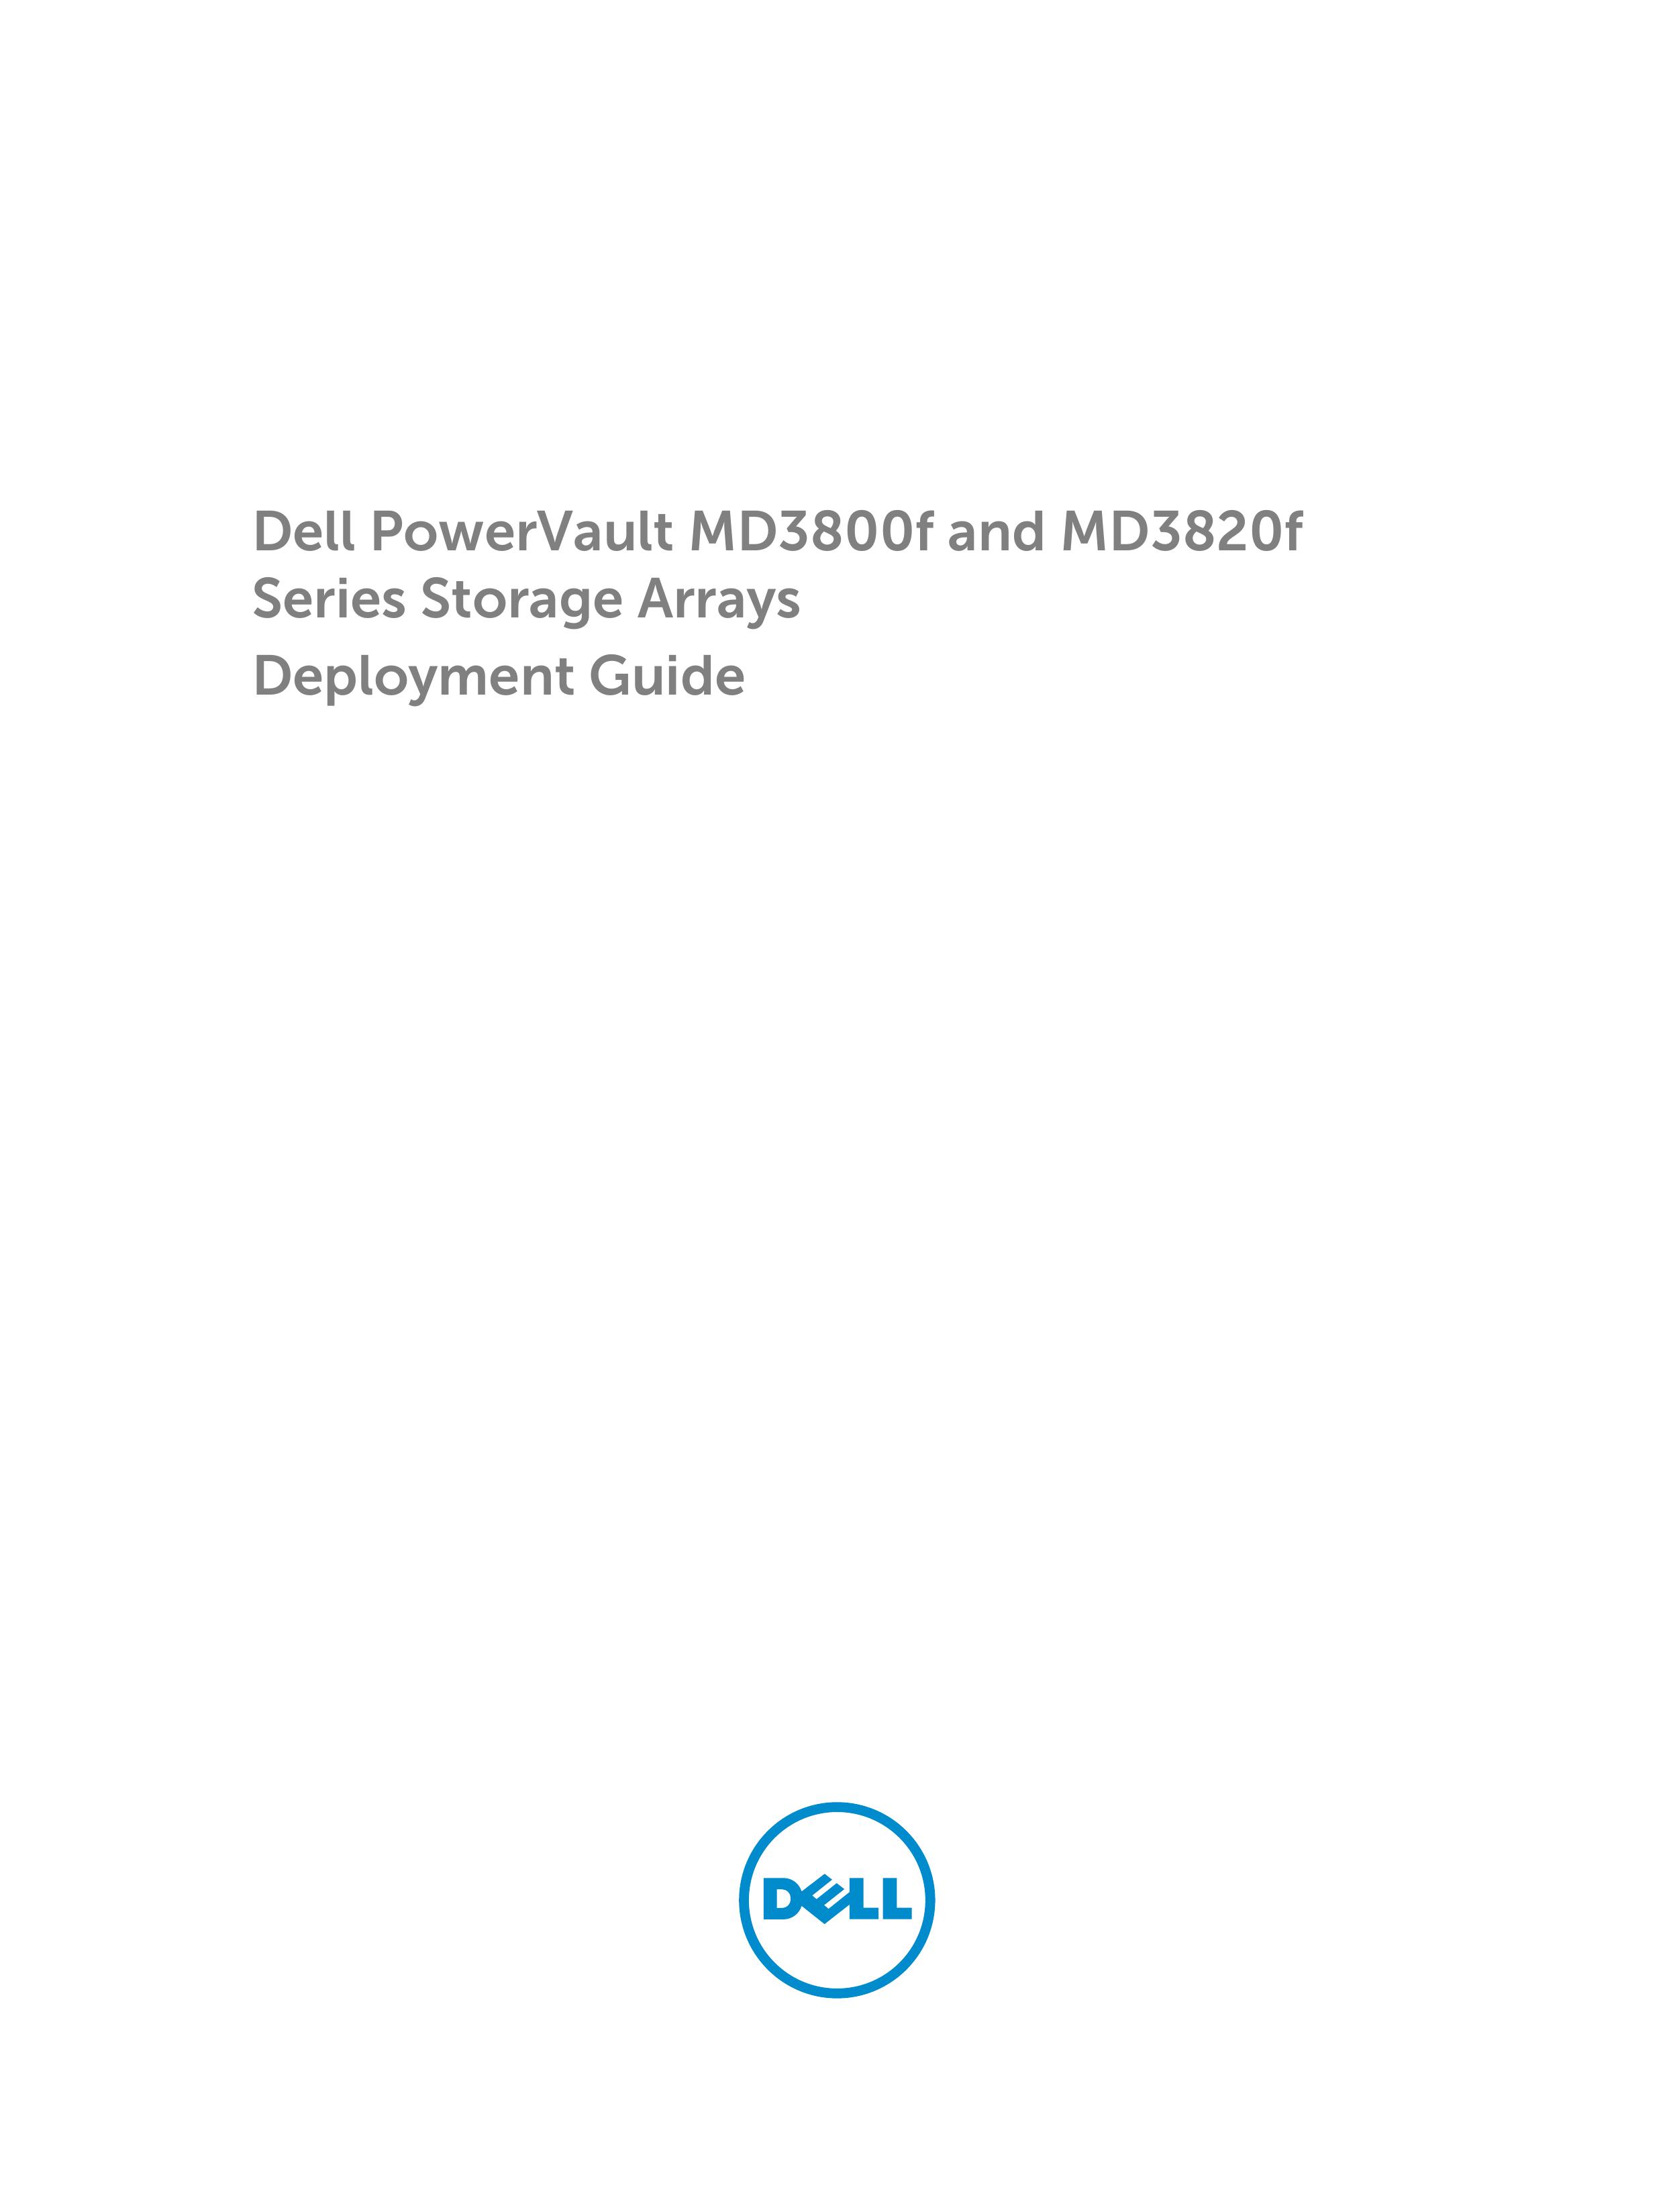 Dell MD3800f Outdoor Storage User Manual